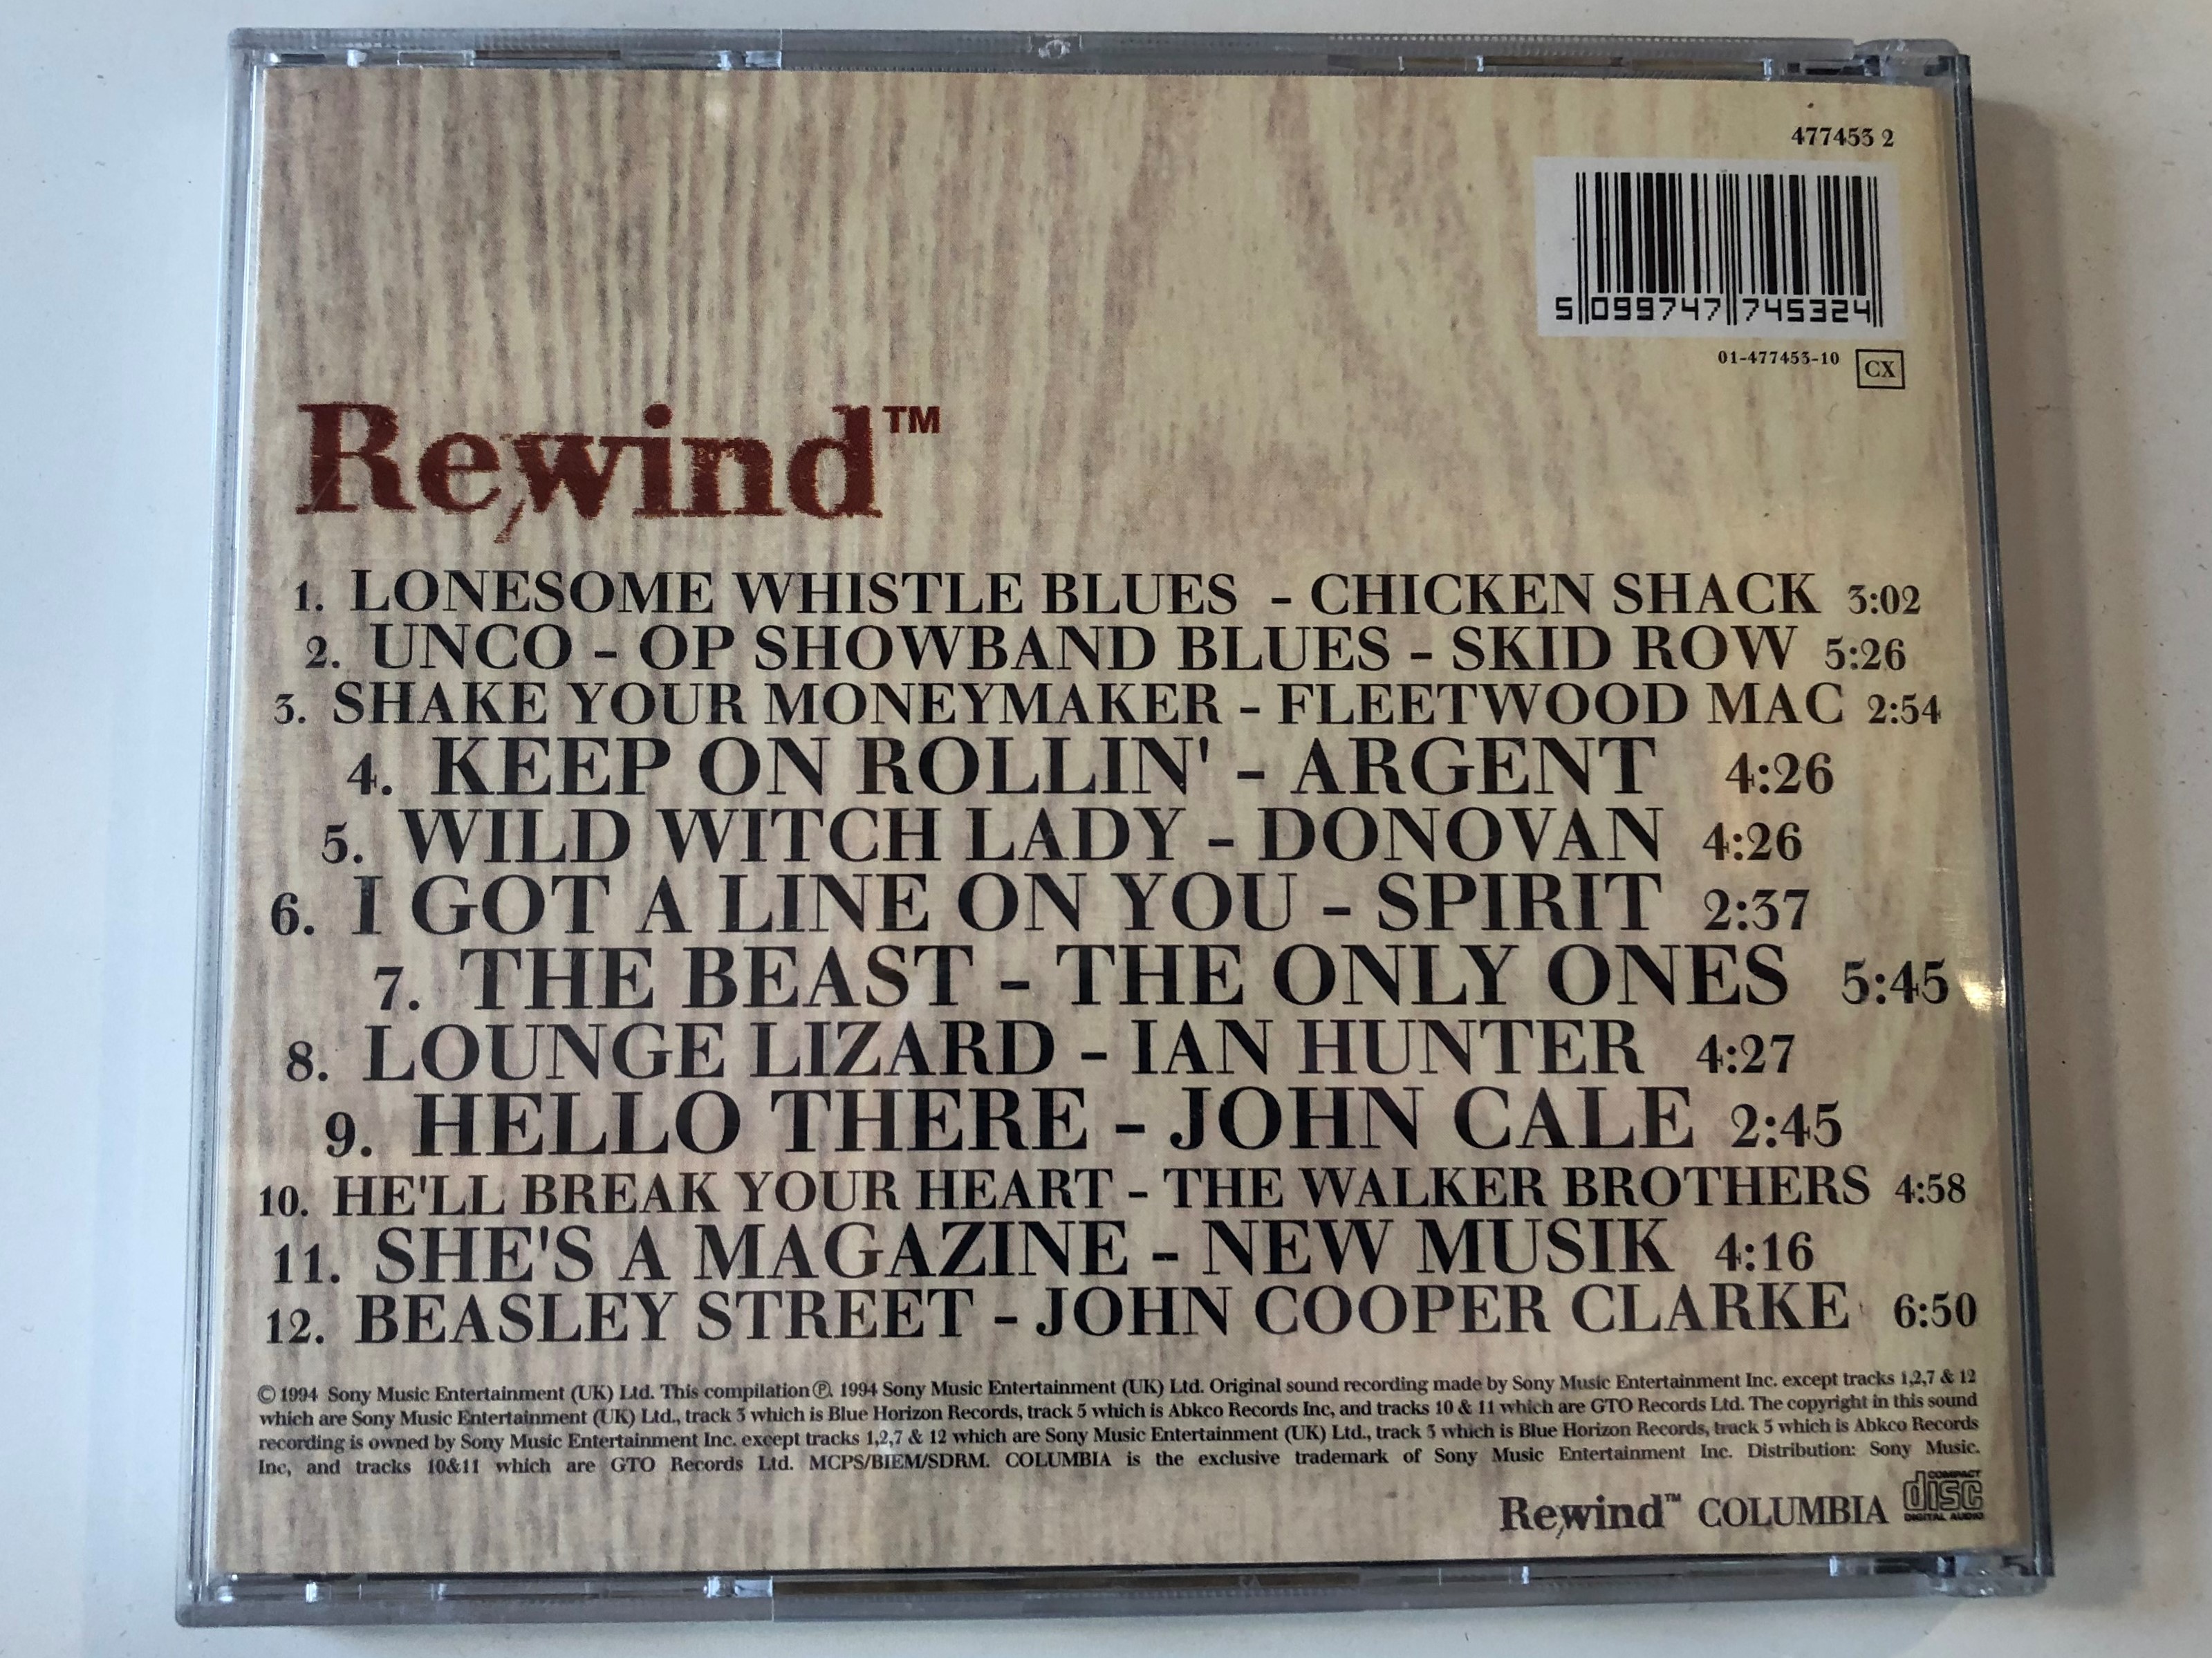 rewind-highlights-from-the-new-classic-reissue-series-chicken-shack-skid-row-fleetwood-mac-argent-donovan-spirit-the-only-ones-ian-hunter-john-cale-the-walker-brothers-new-musik-c.jpg